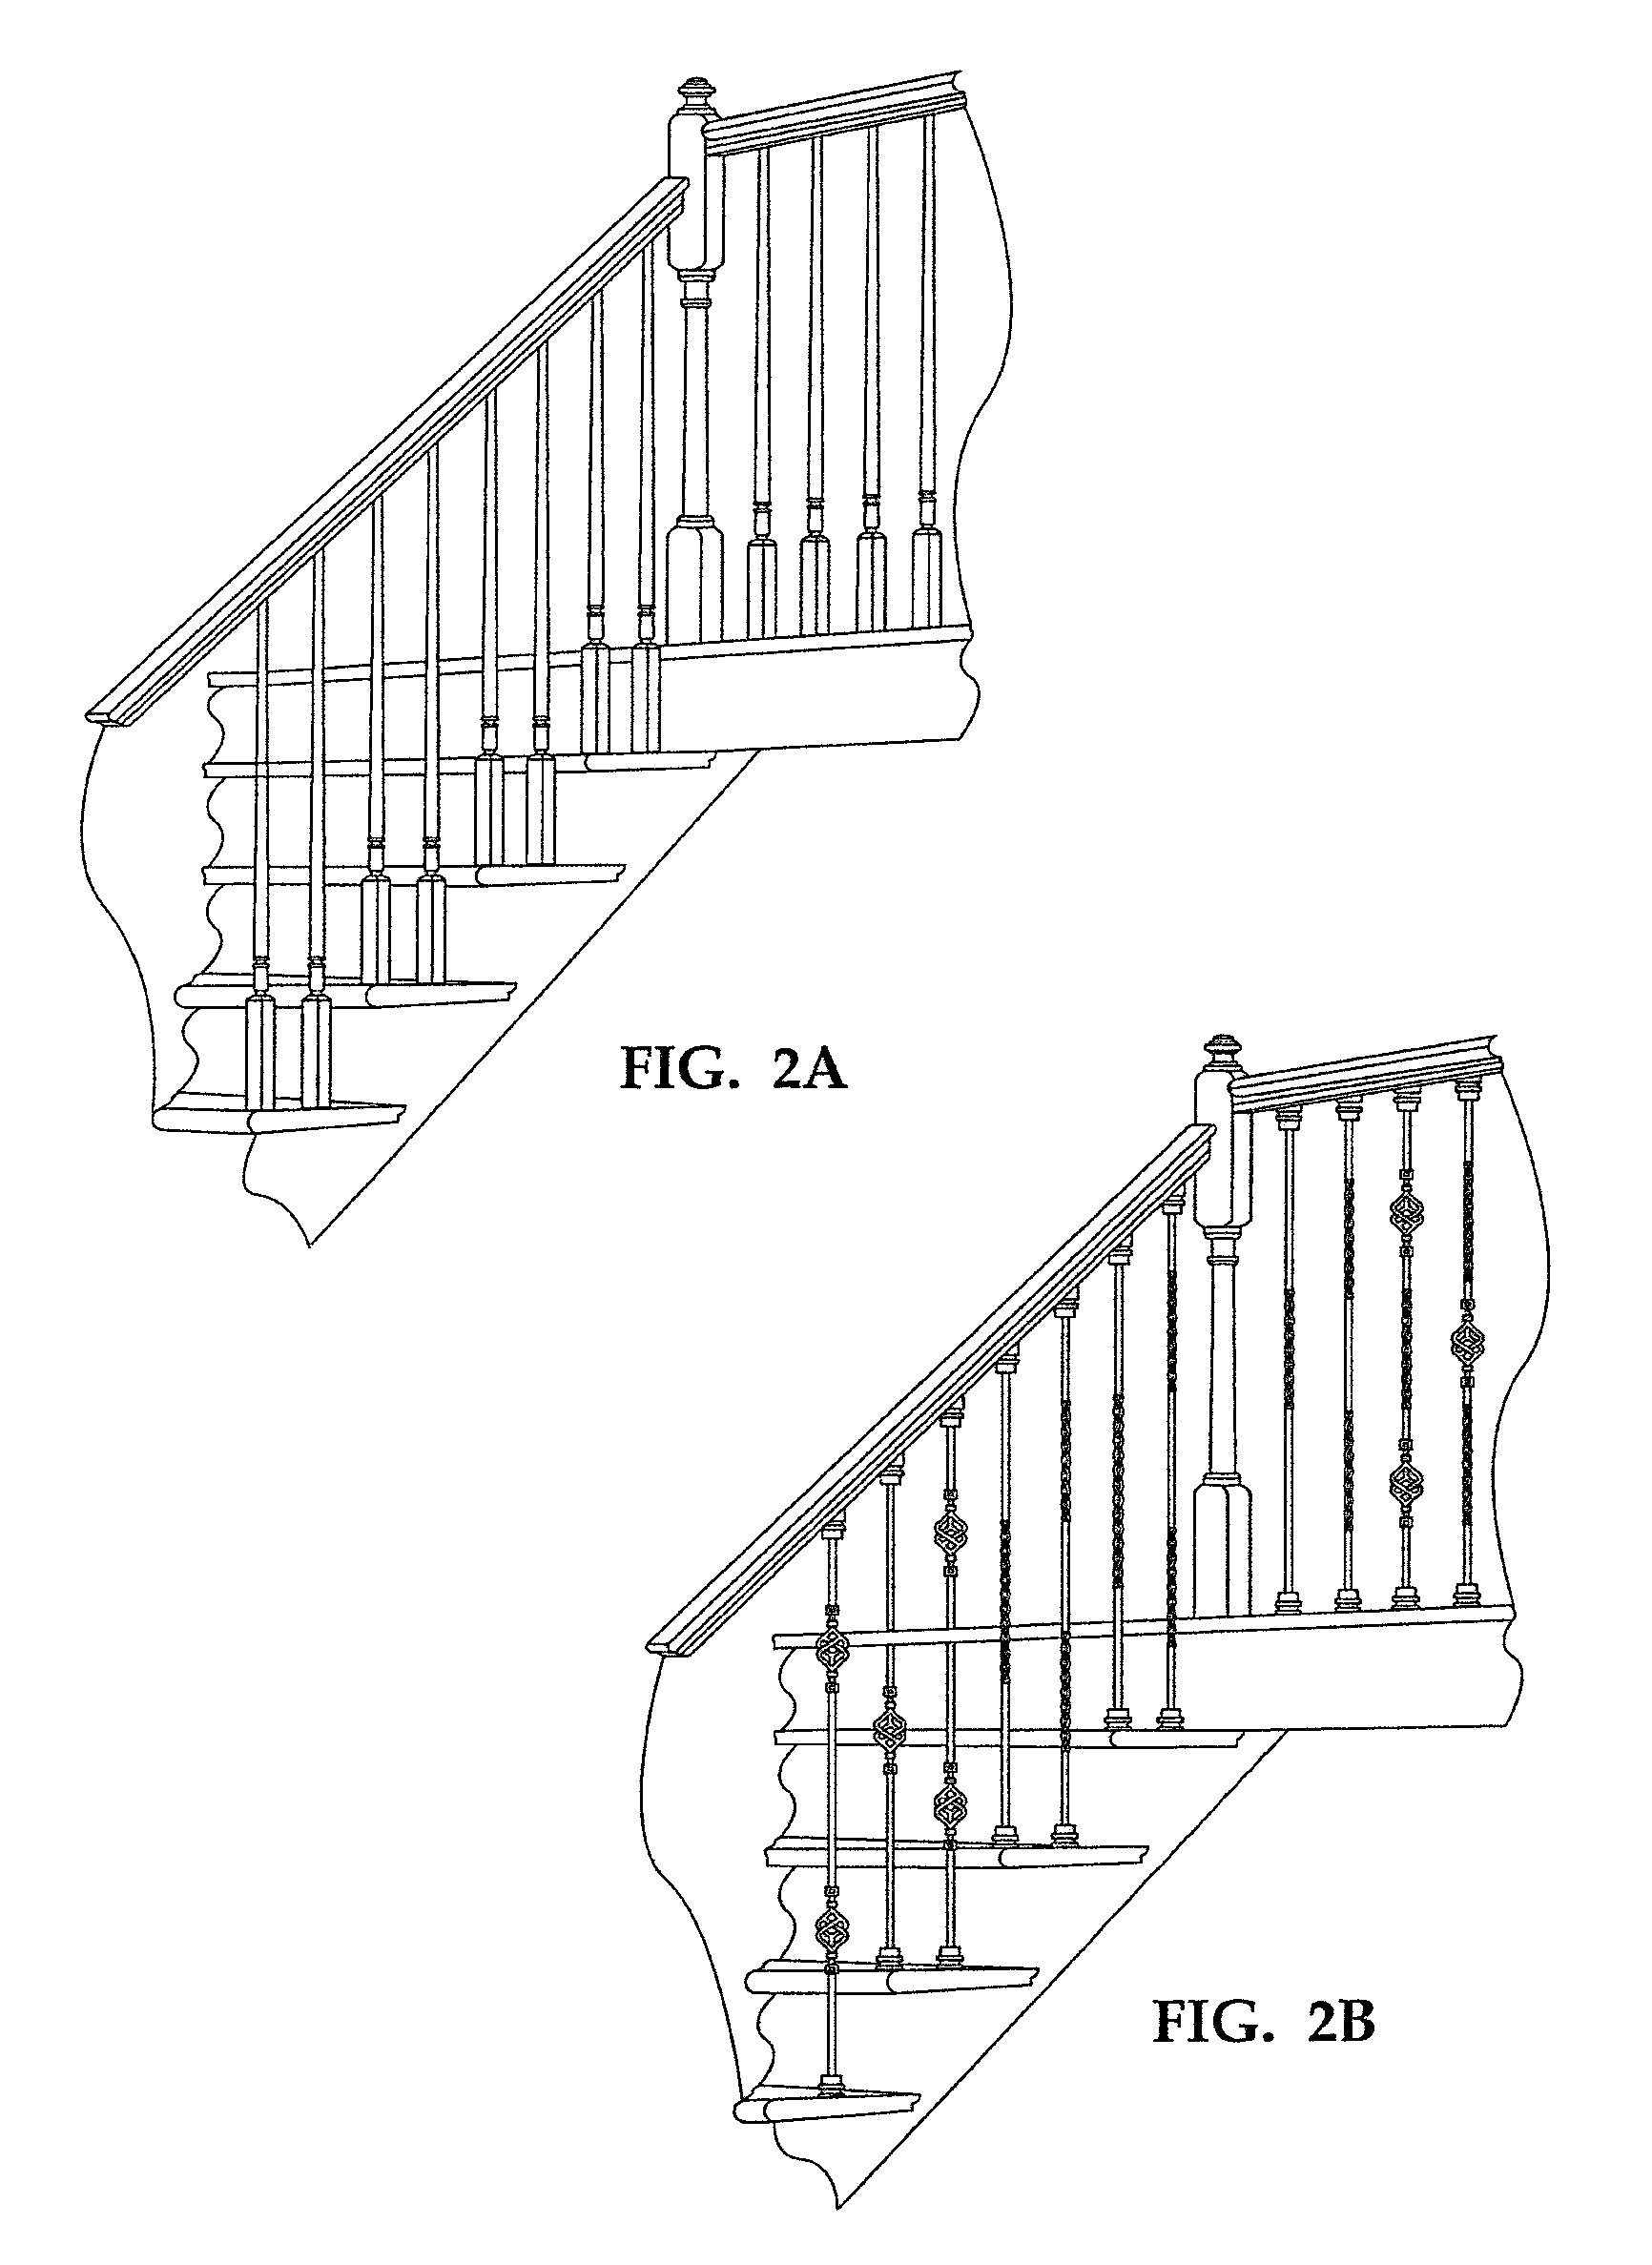 Stairway system having an improved baluster assembly